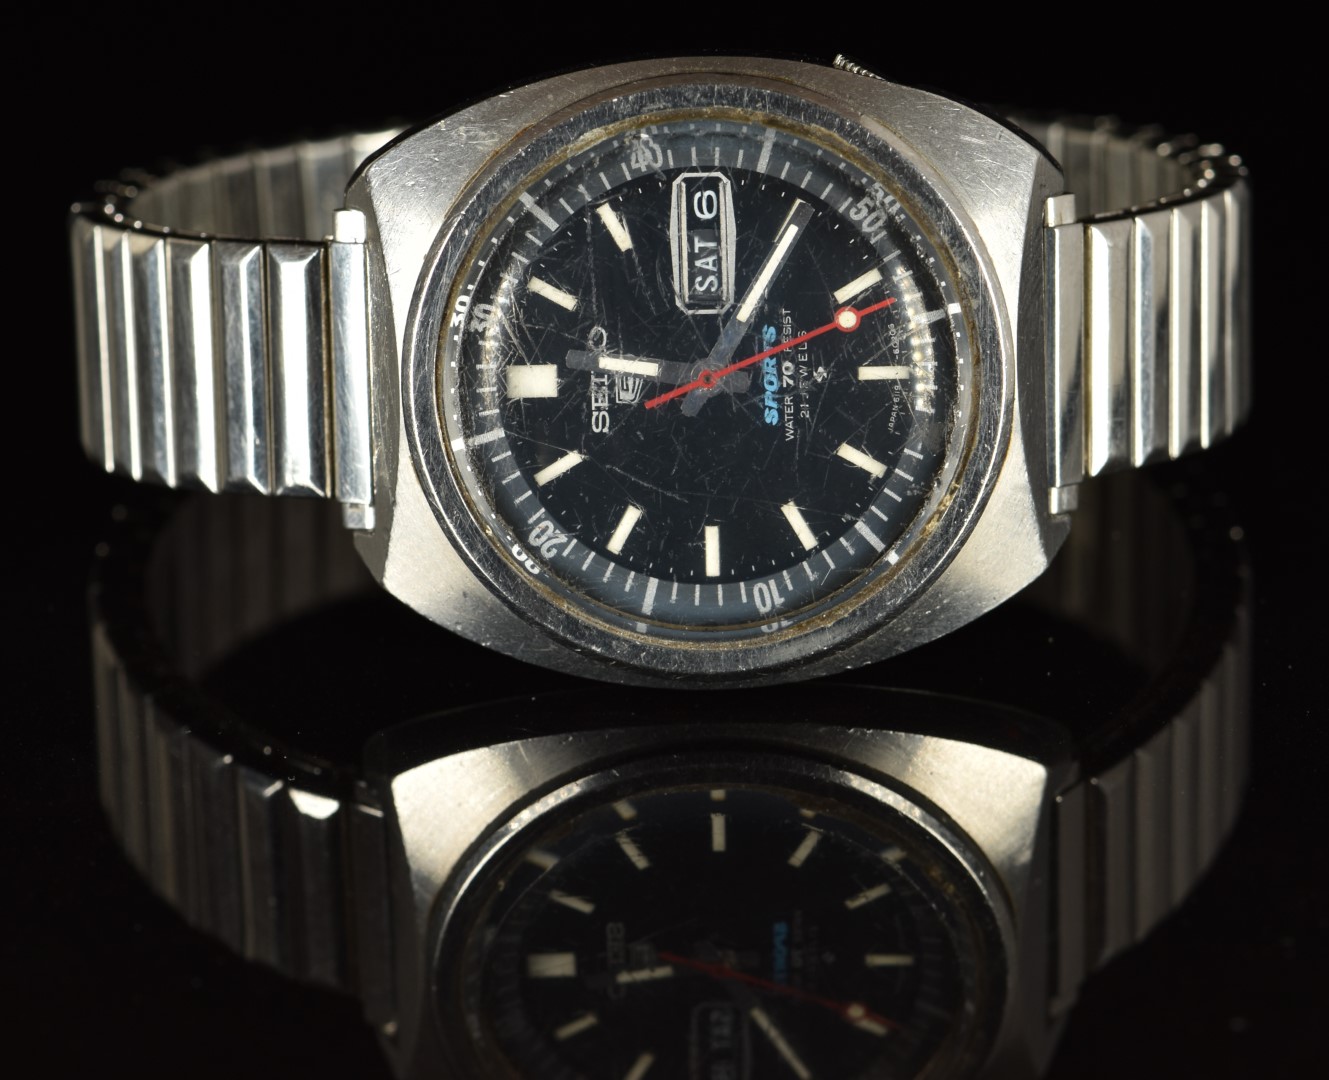 Seiko 5 Sports gentleman's automatic wristwatch ref. 6119-6023 with day and date aperture, - Image 2 of 4